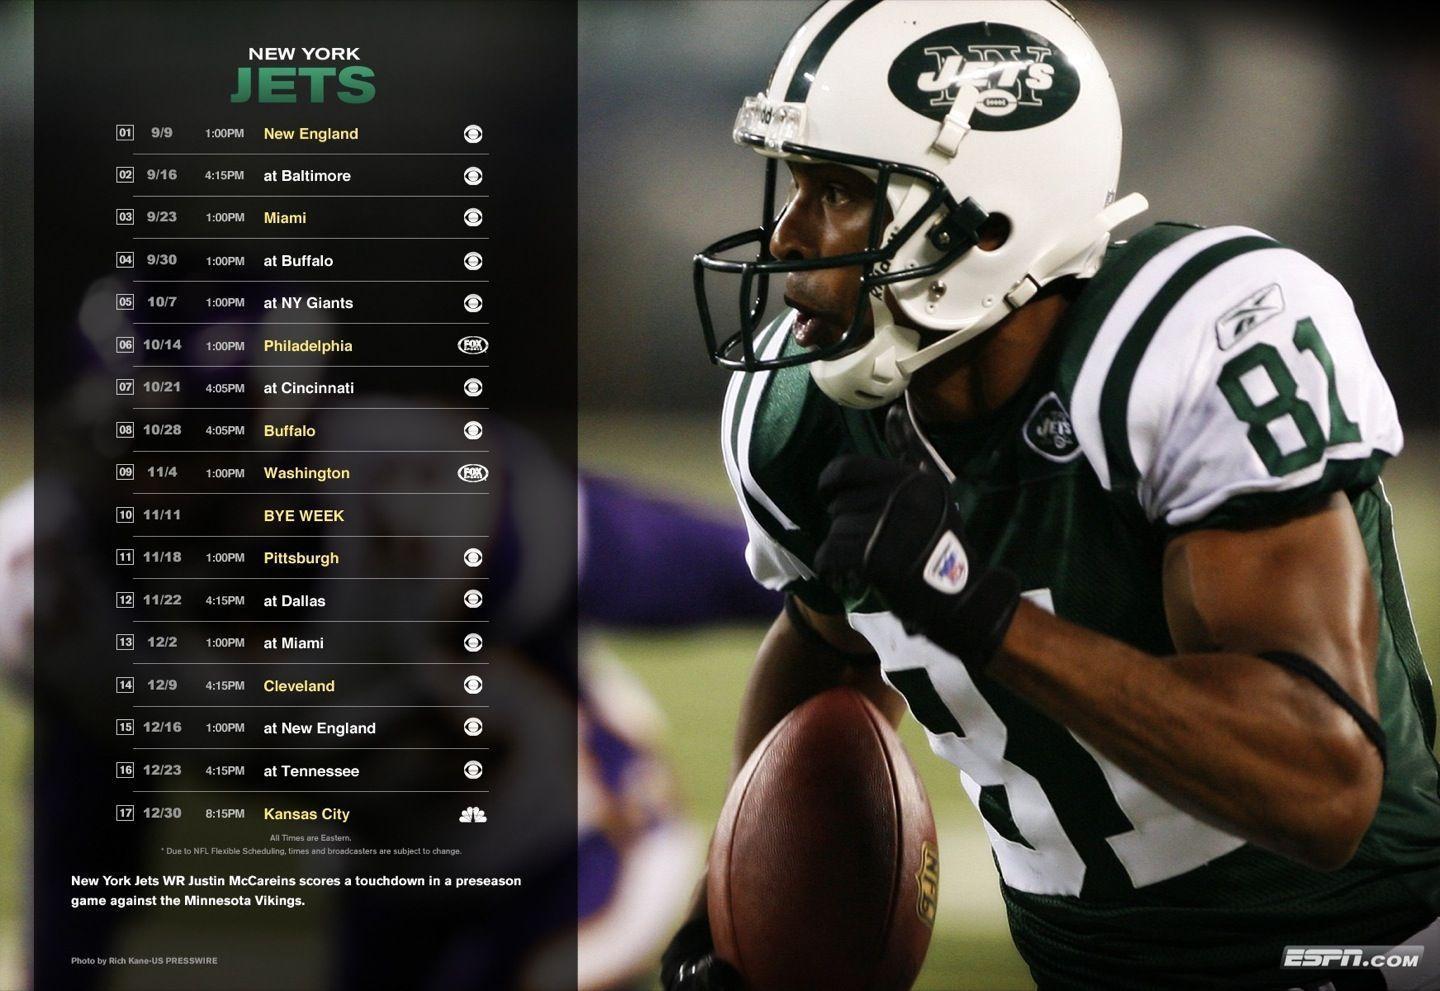 You Guys Asked Us For More New York Jets Wallpaper, So, Here You